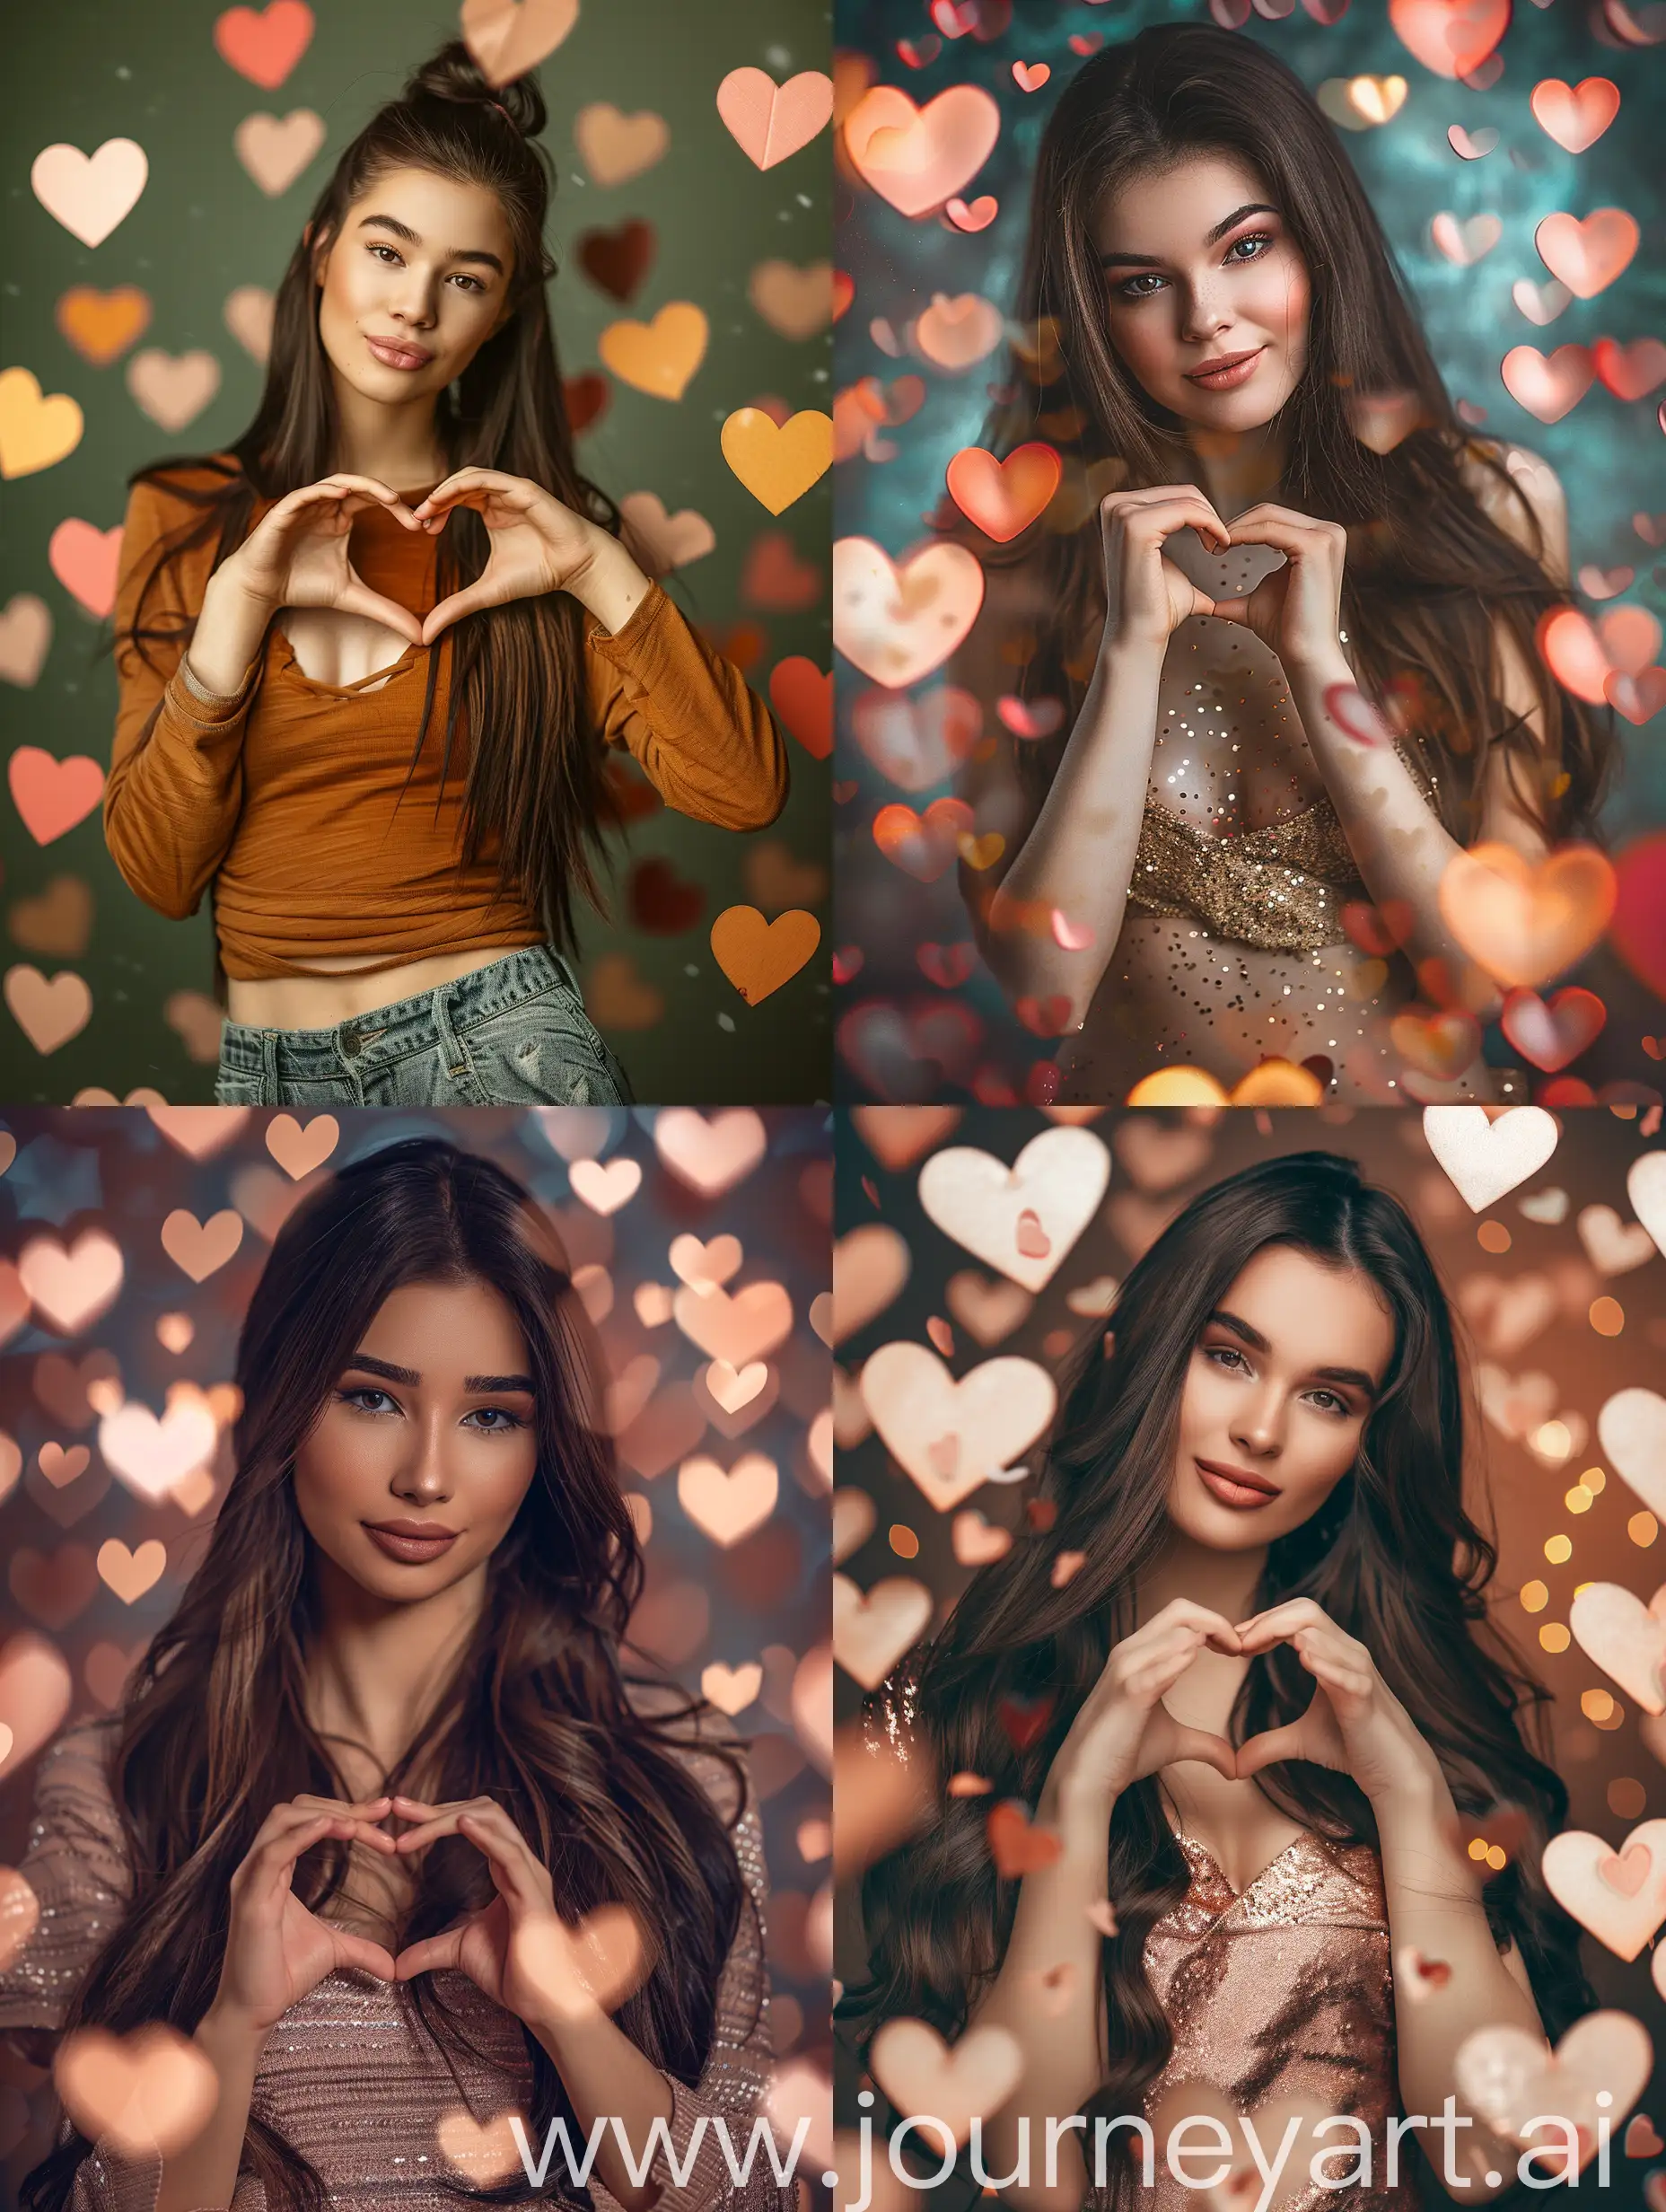 Stunning-Woman-Surrounded-by-Hearts-Dark-Brown-Hair-Beauty